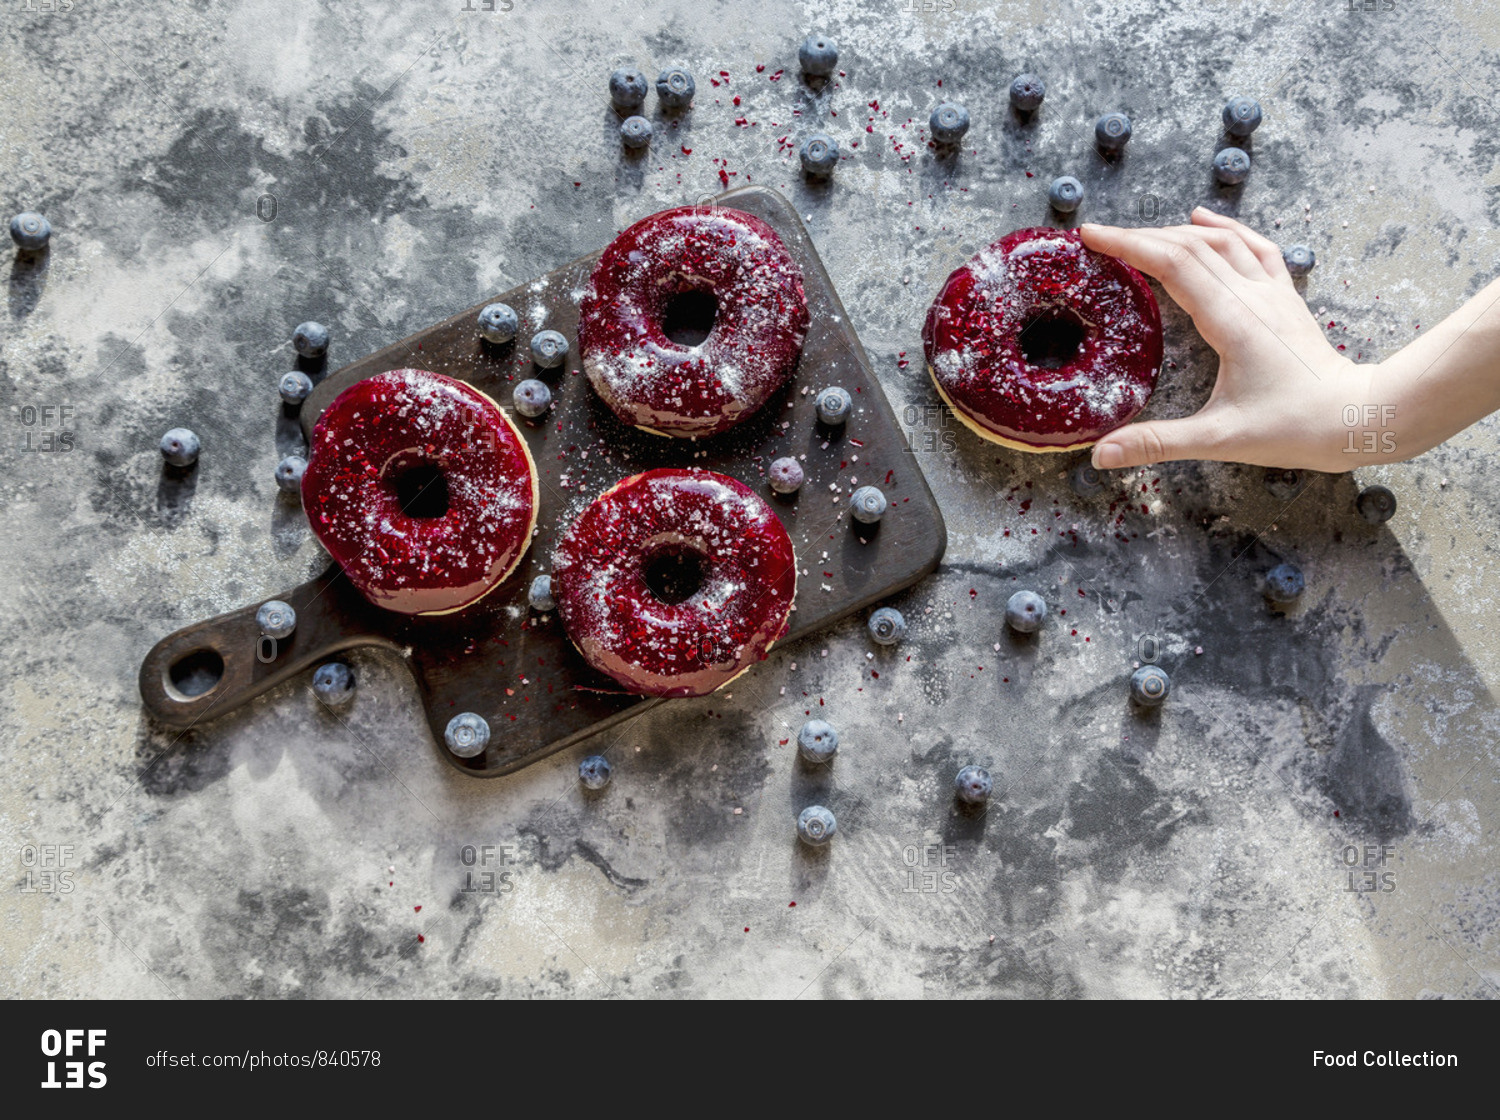 A hand taking a doughnut with blueberry glaze and glitter powder